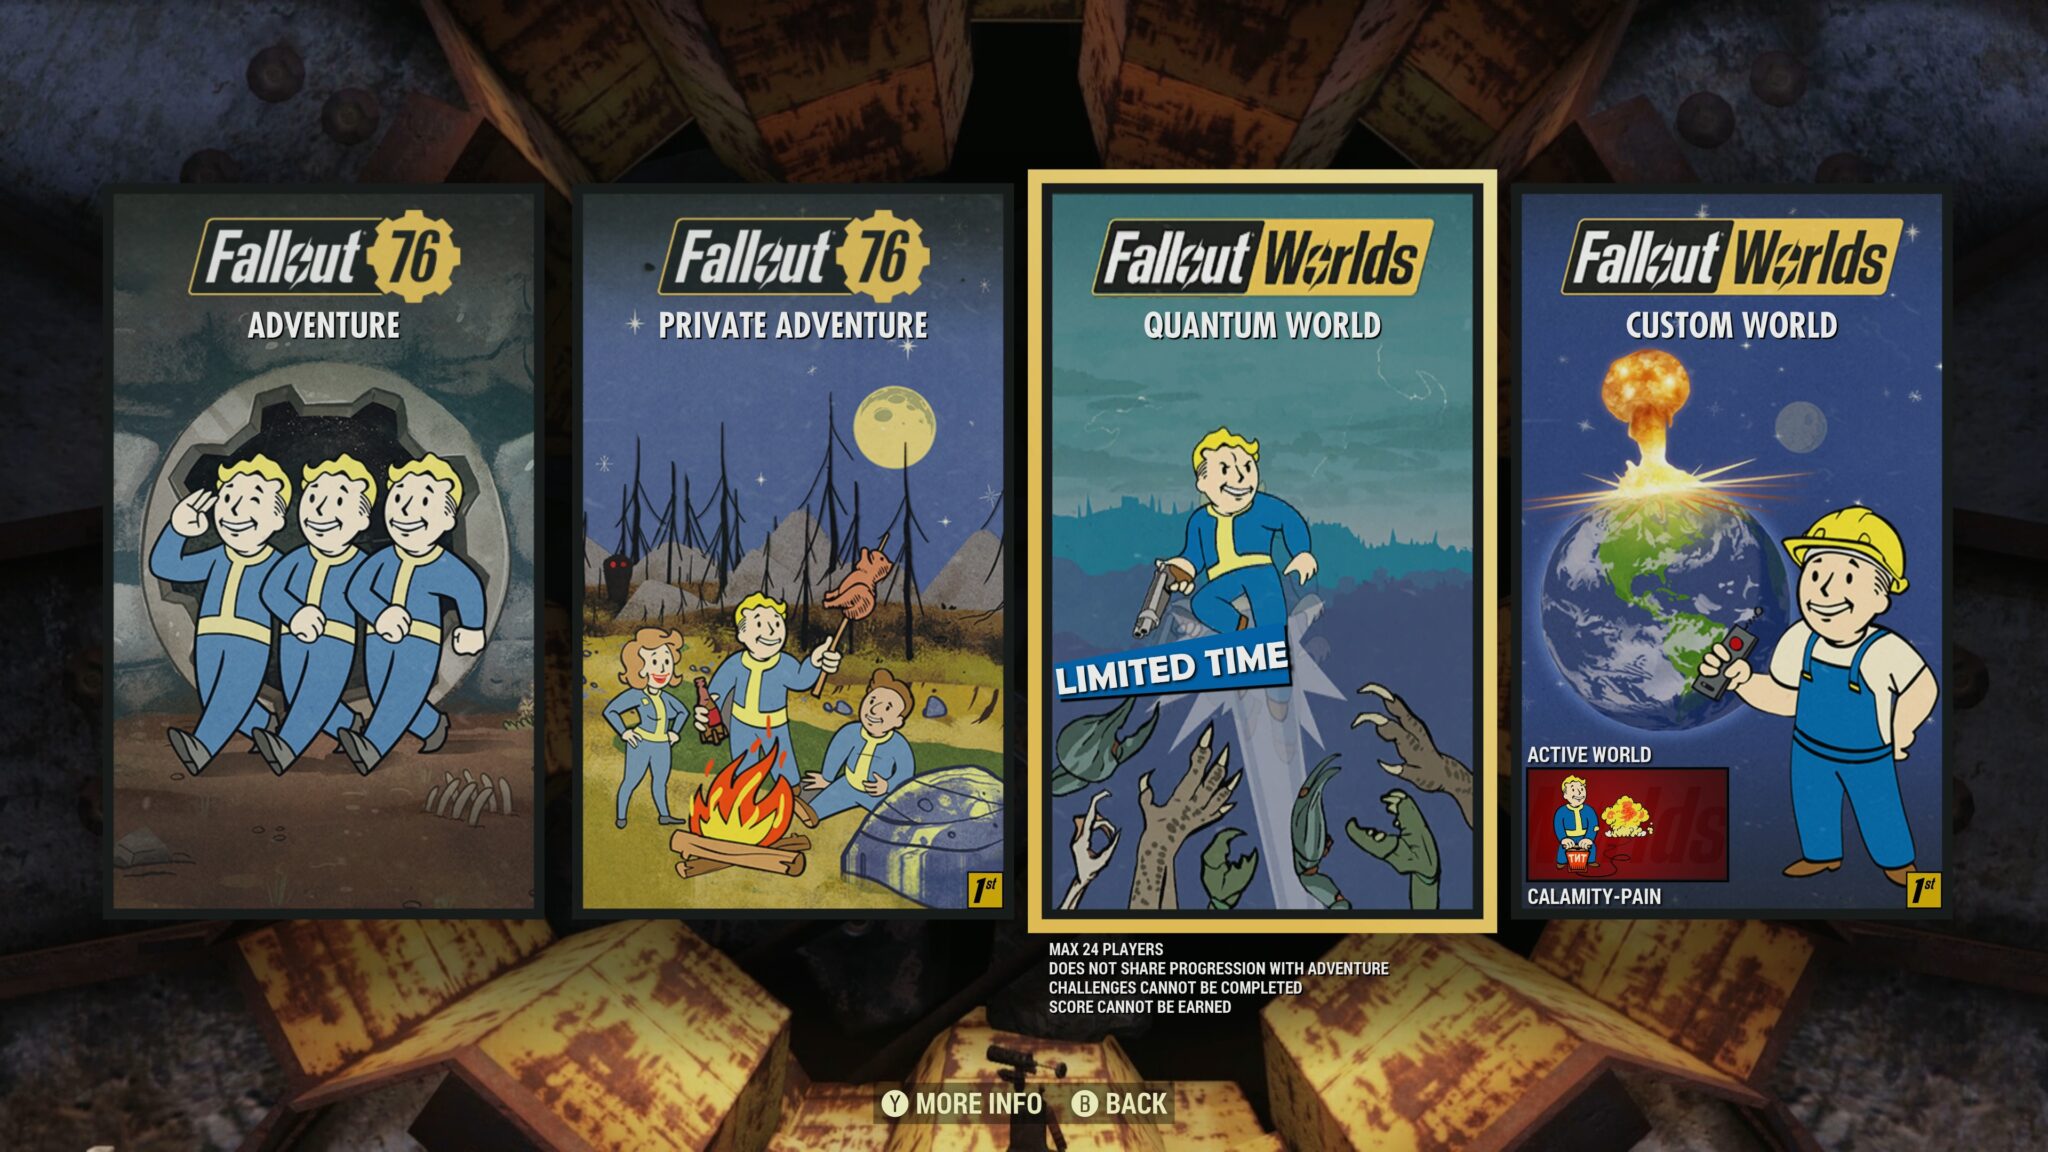 You can switch between the different game modes in Fallout 76.